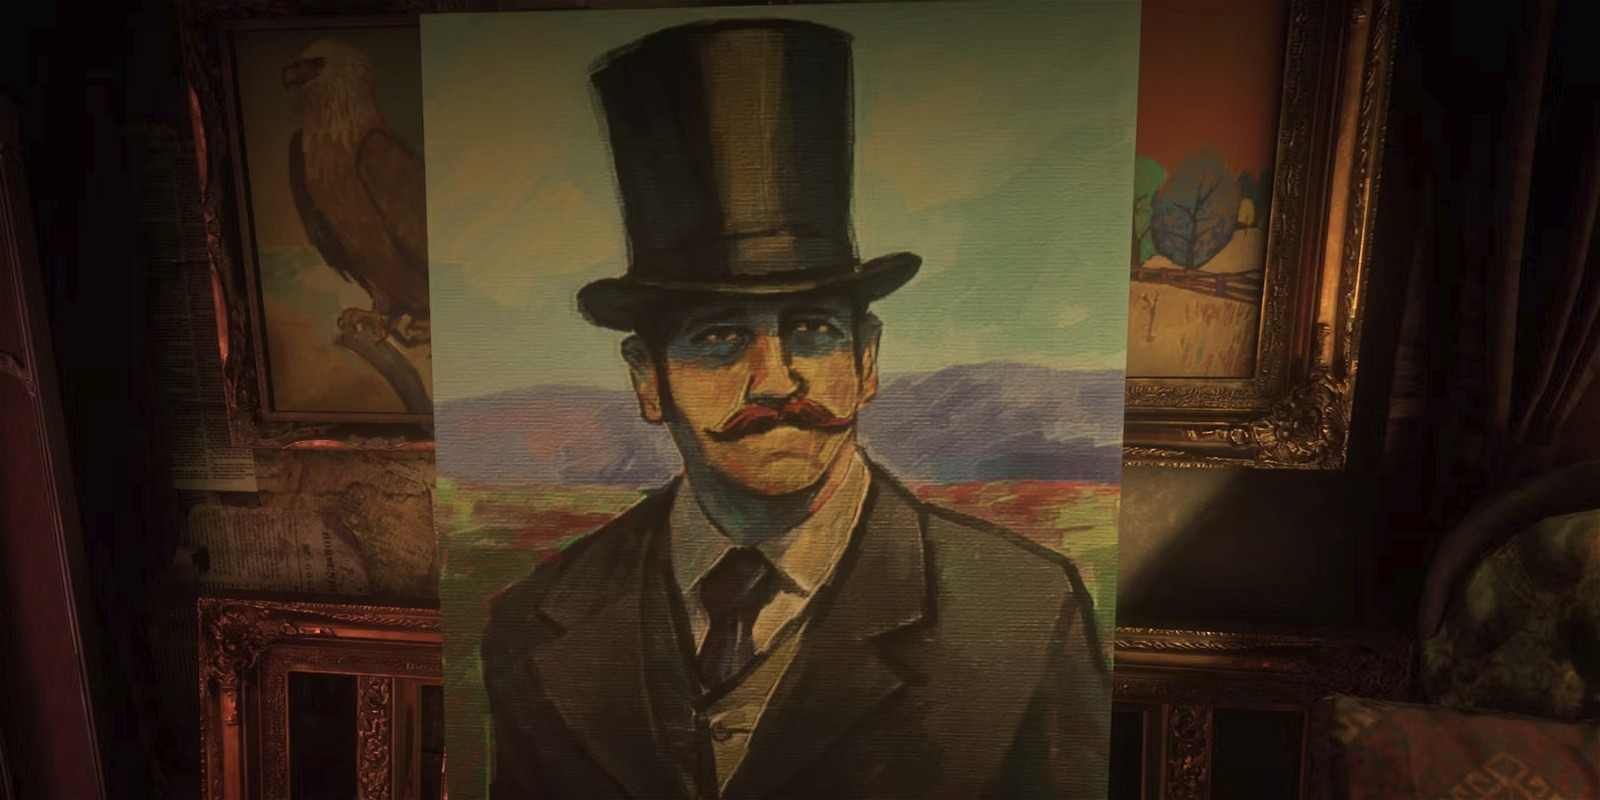 The Strange Man was an easter egg in an RDR2 painting, but could return fully in Red Dead Redemption 3. Image credit: Rockstar